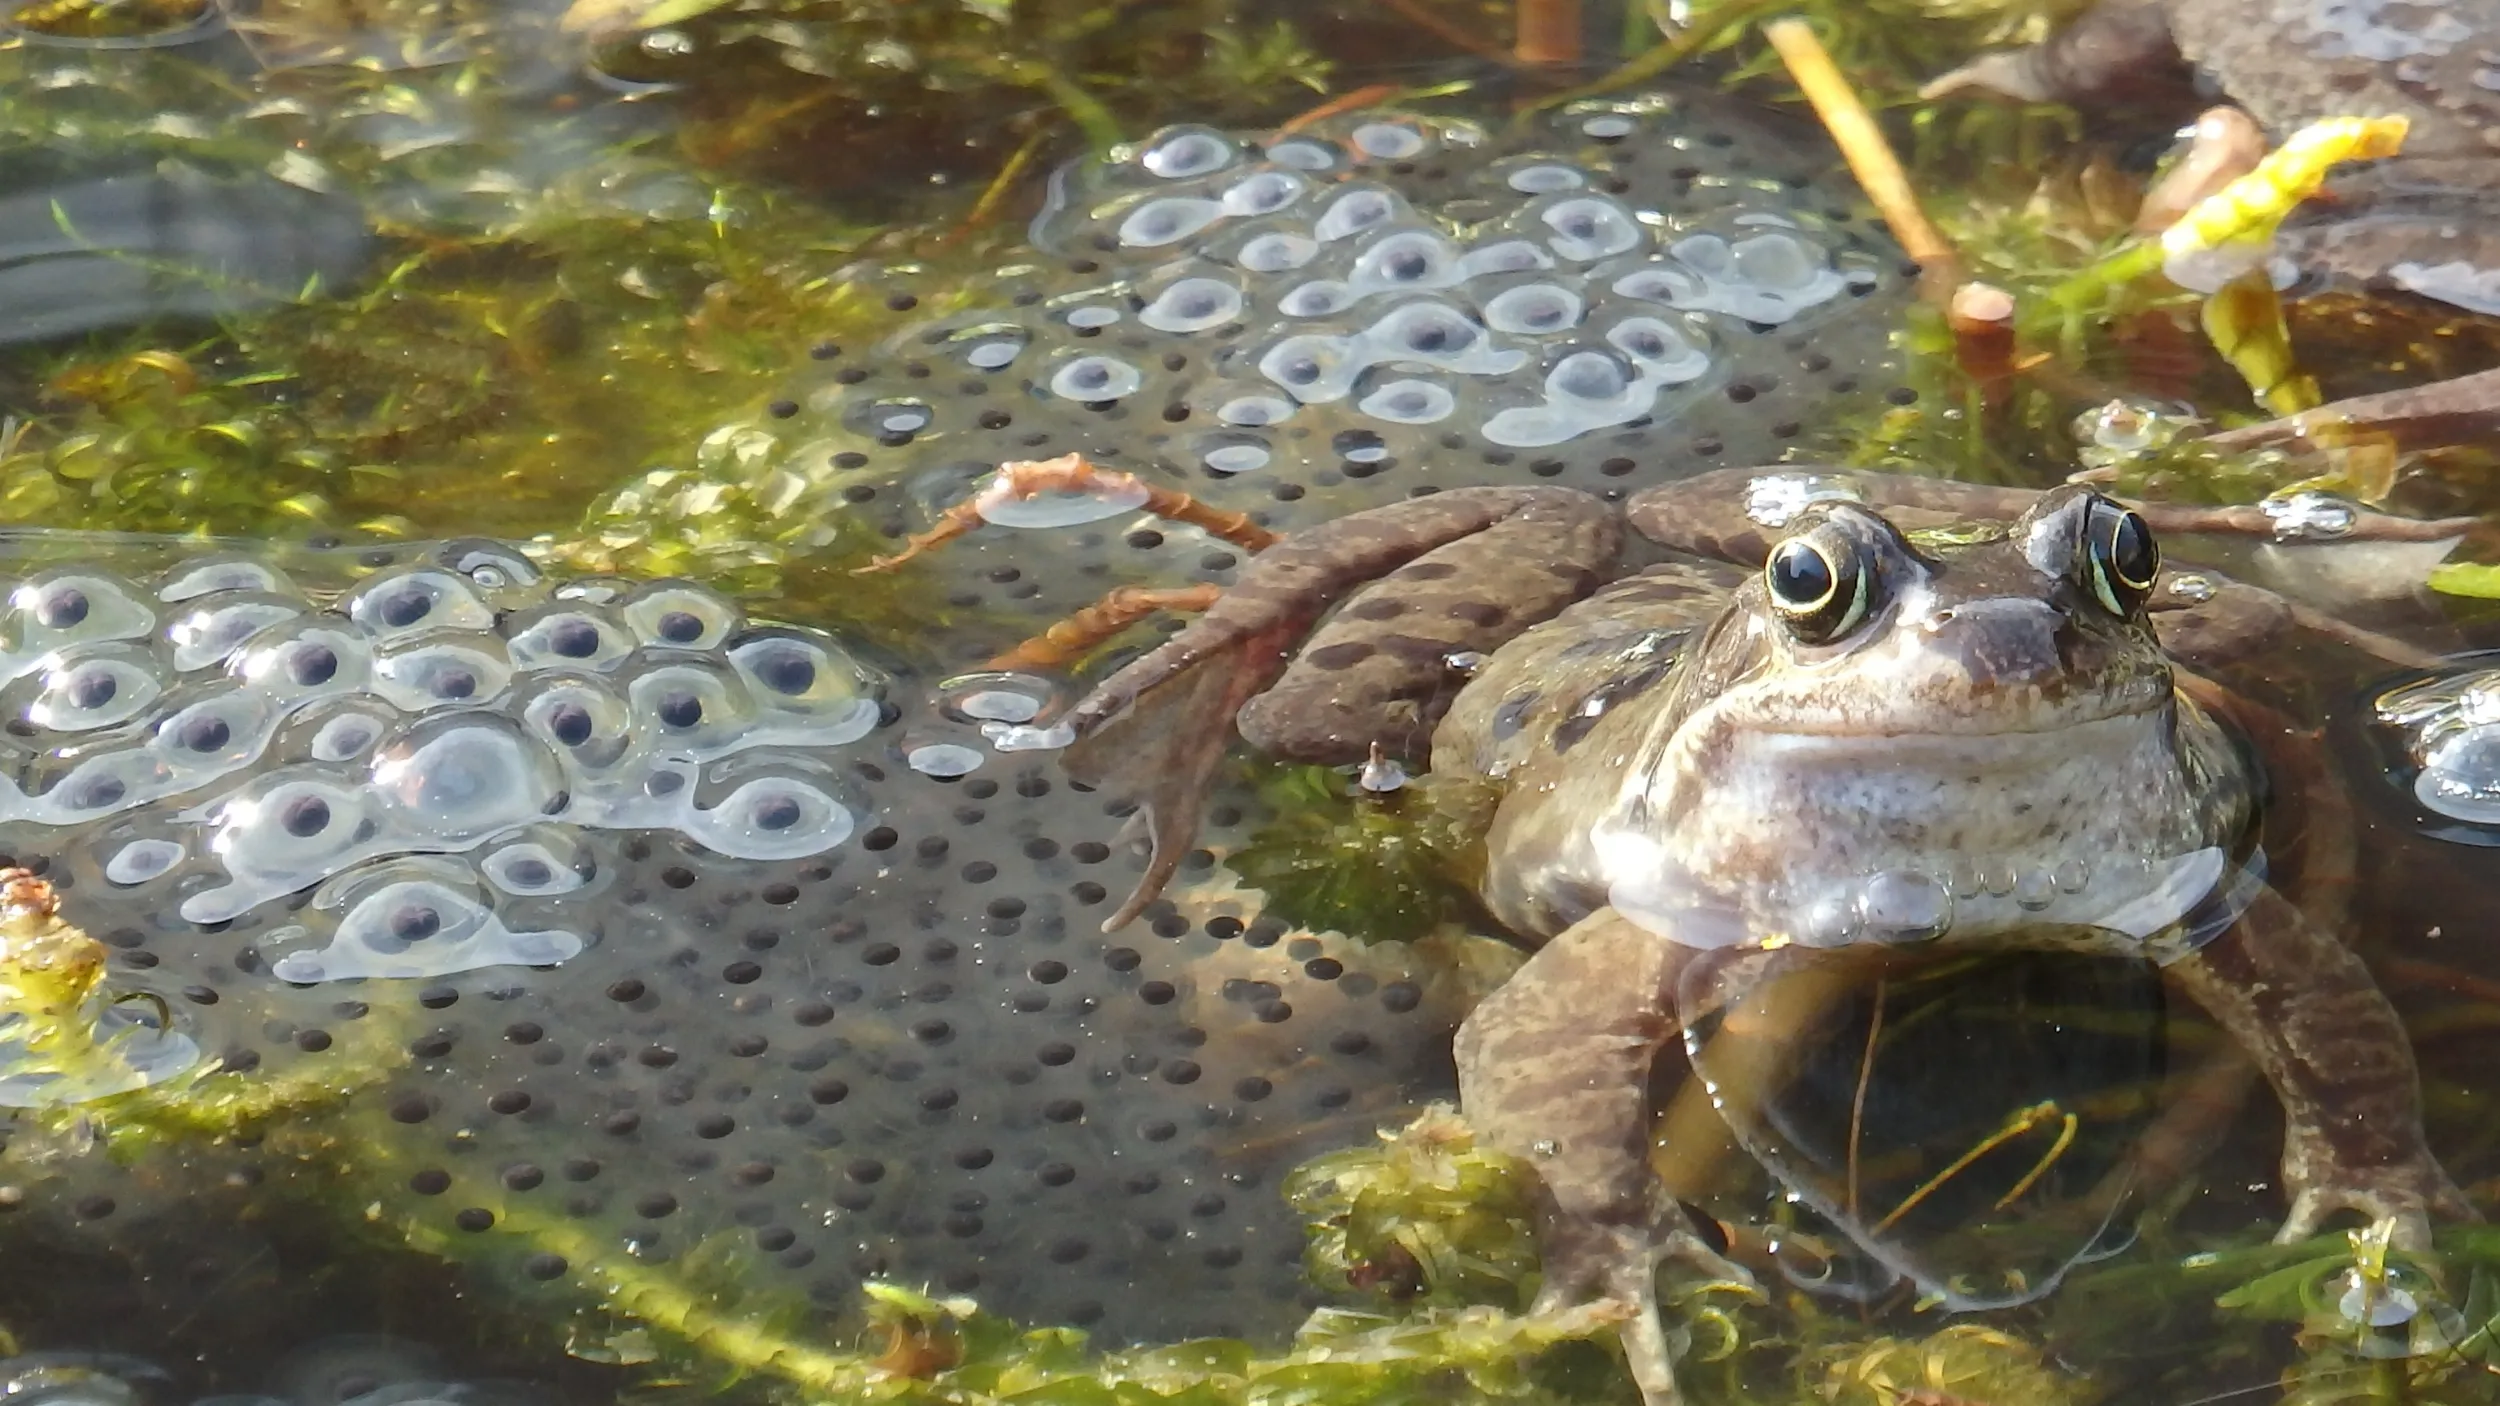 A Frog in a pond with frog spawn surrounding it. 